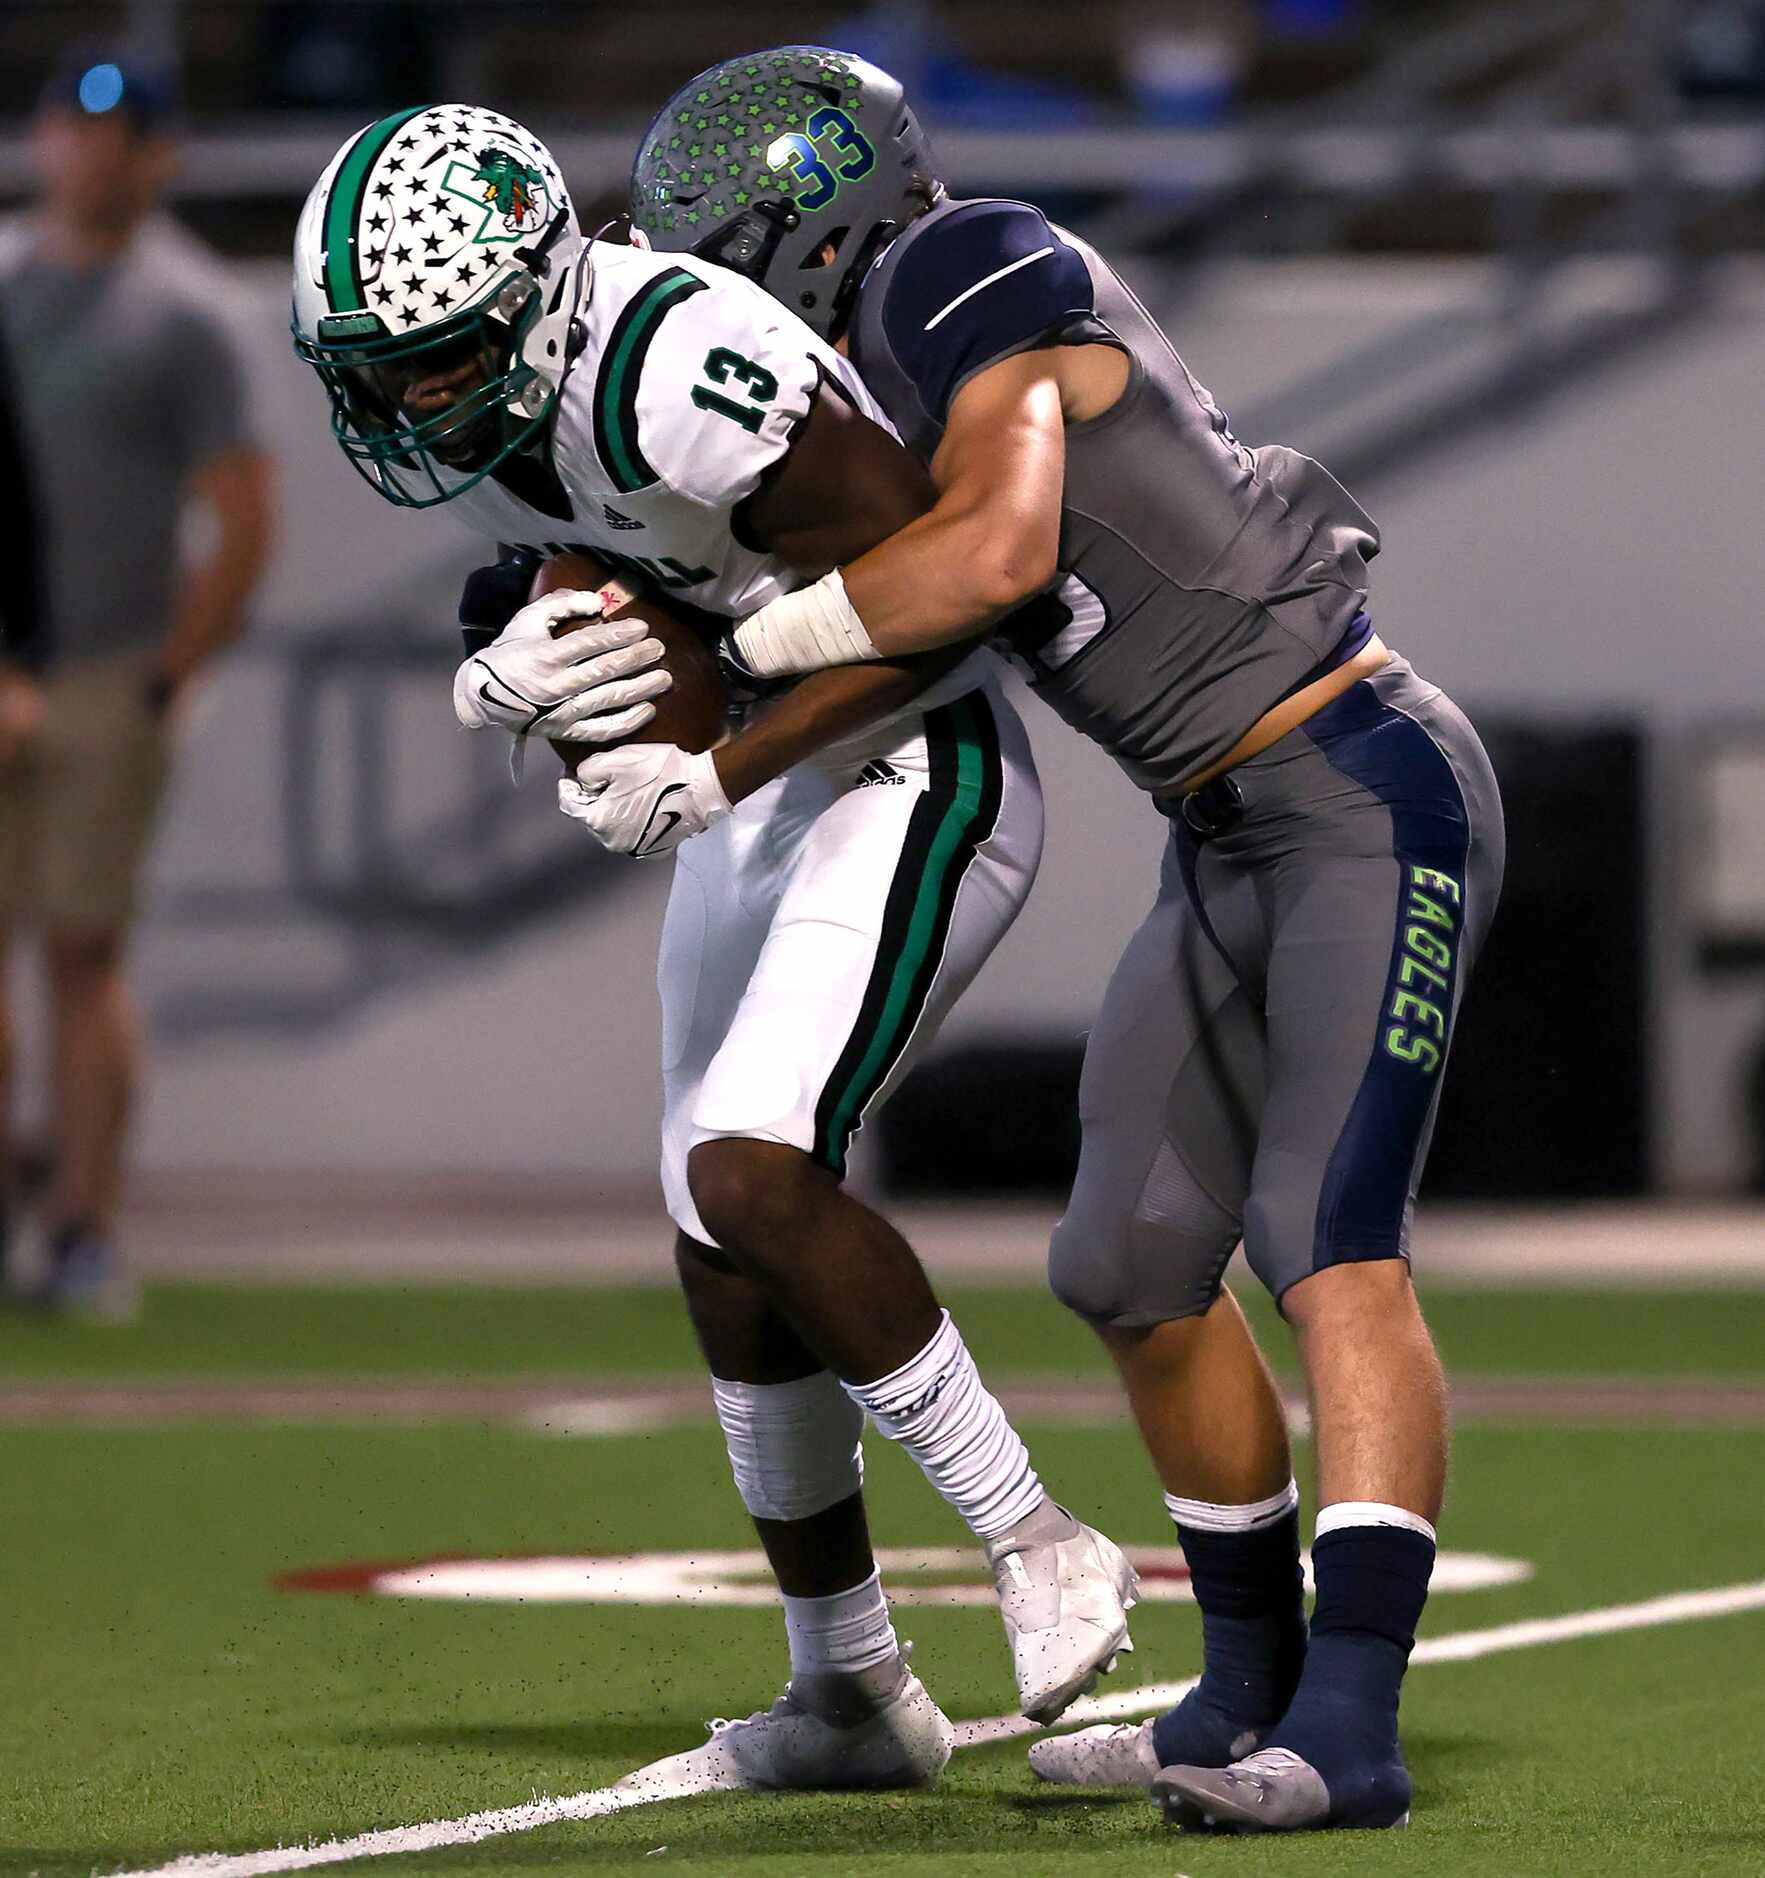 Southlake Carroll wide receiver RJ Maryland (13) comes up with a reception against Eaton...